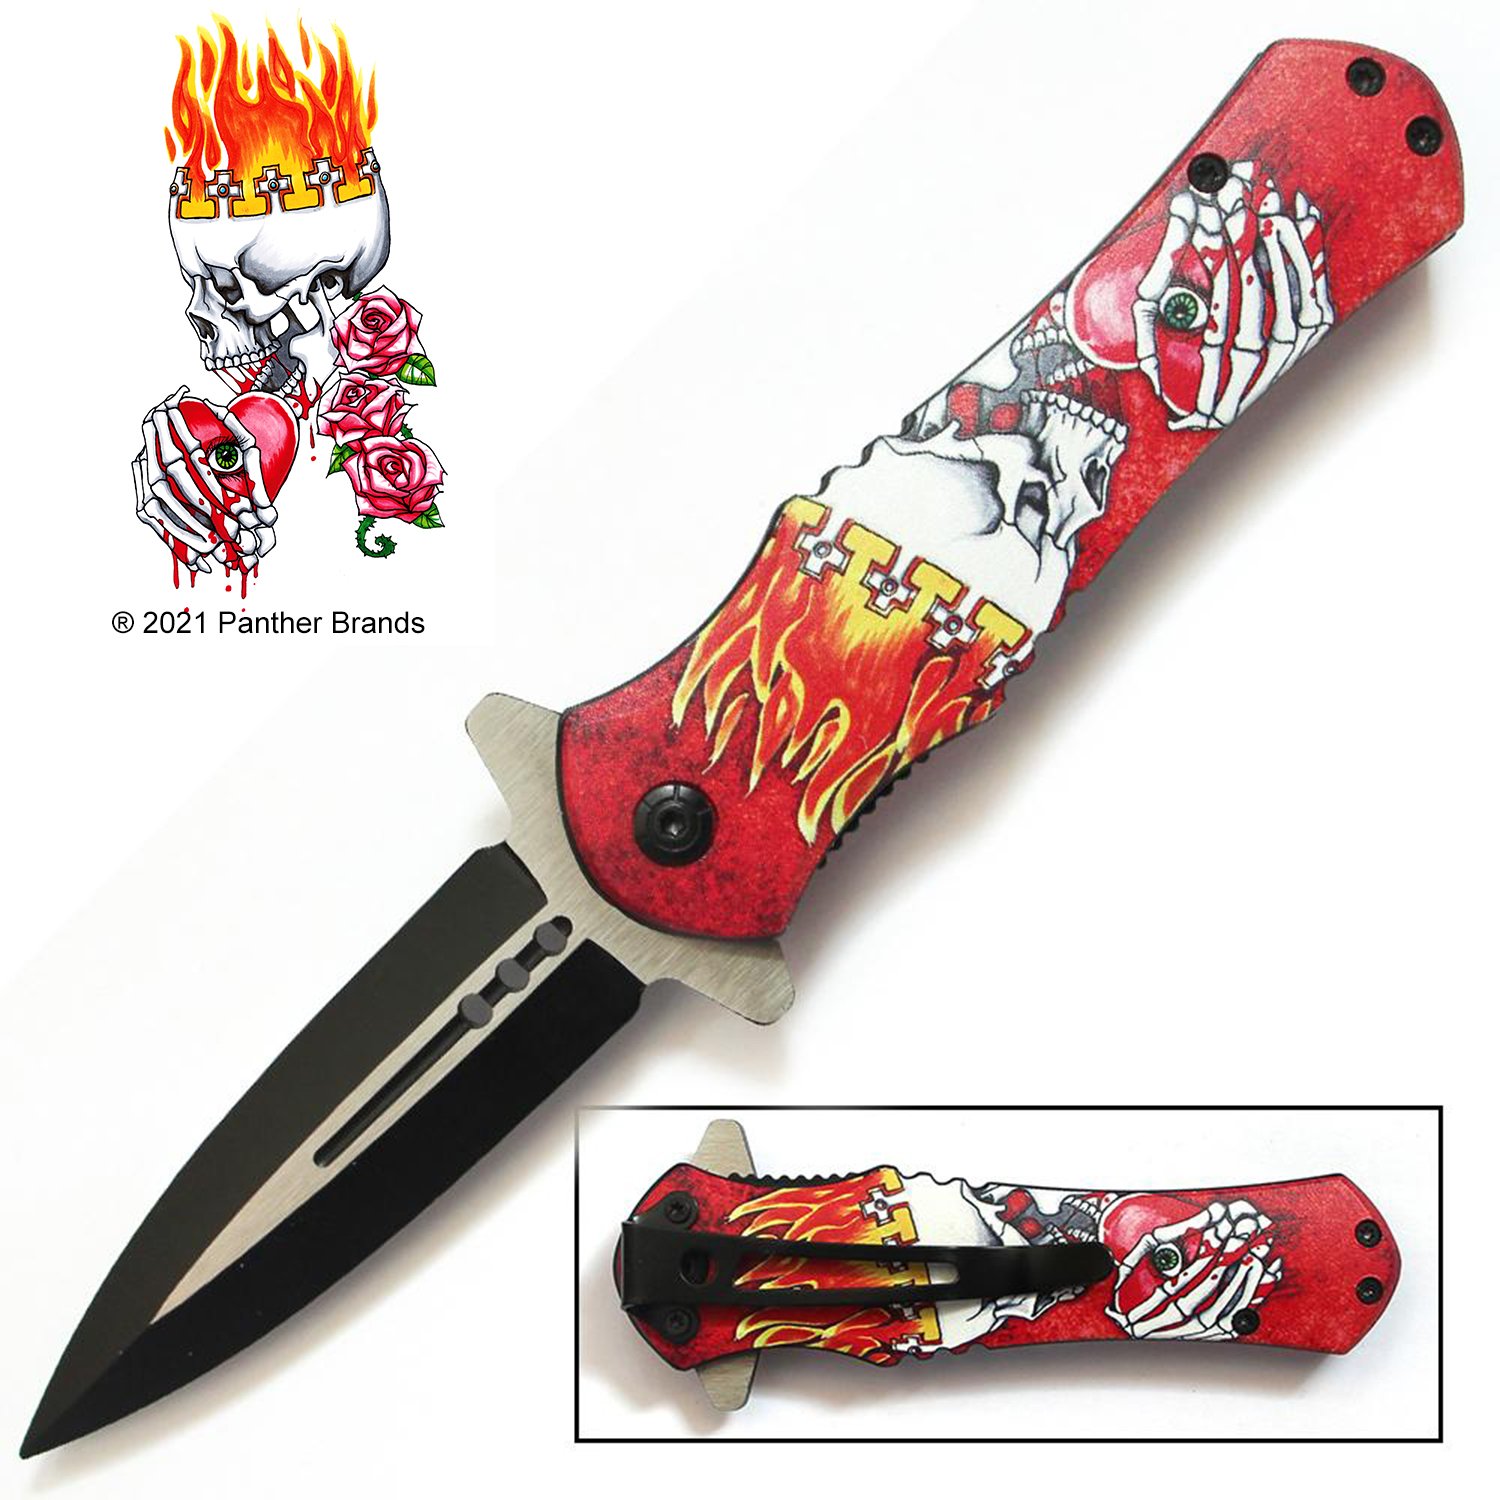 Tiger USA Spring Assisted Knife   Take a Heart